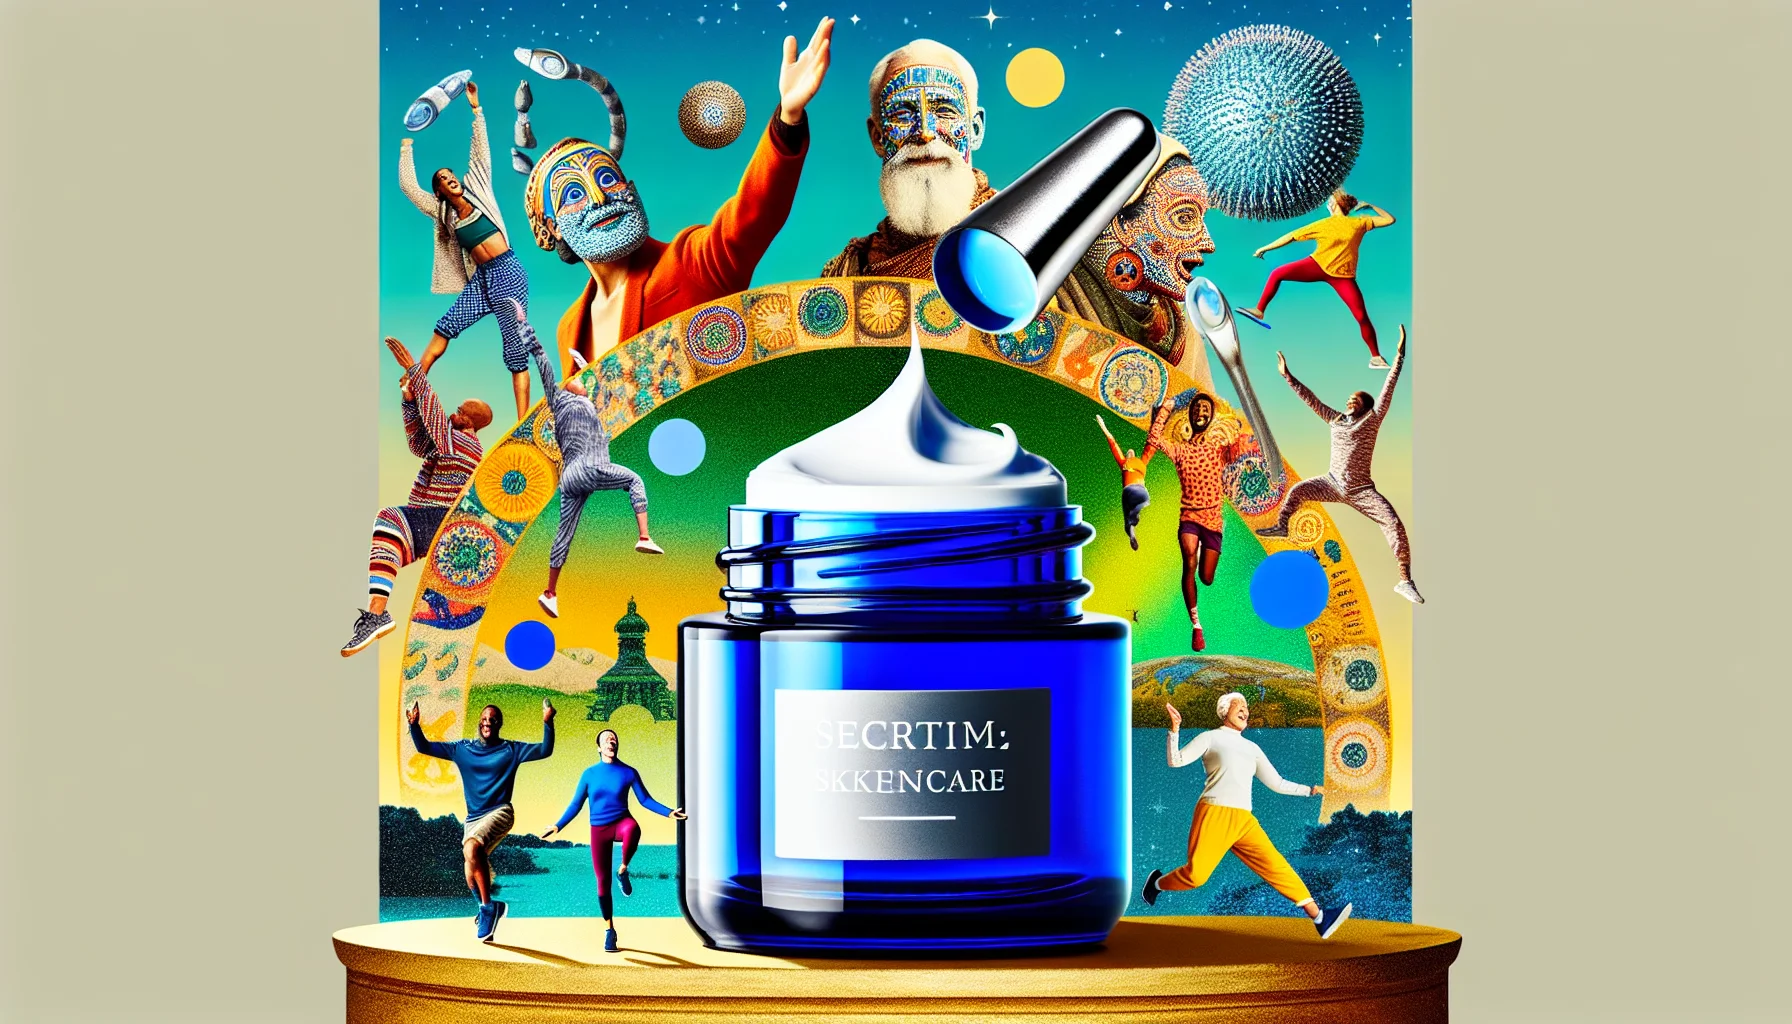 Generate a humorous image of an anonymous yet fit female model with white descent, releasable age, and long blonde hair, symbolizing the secret to anti-aging: Nighttime skincare products. She is amidst a hilariously oversized jar of face cream, much larger than she is. In the background, some lively exercise scenes exist, like people of diverse descents and genders joyfully jumping rope or doing yoga, subtly promoting the importance of regular exercise along with skincare for a youthful countenance.